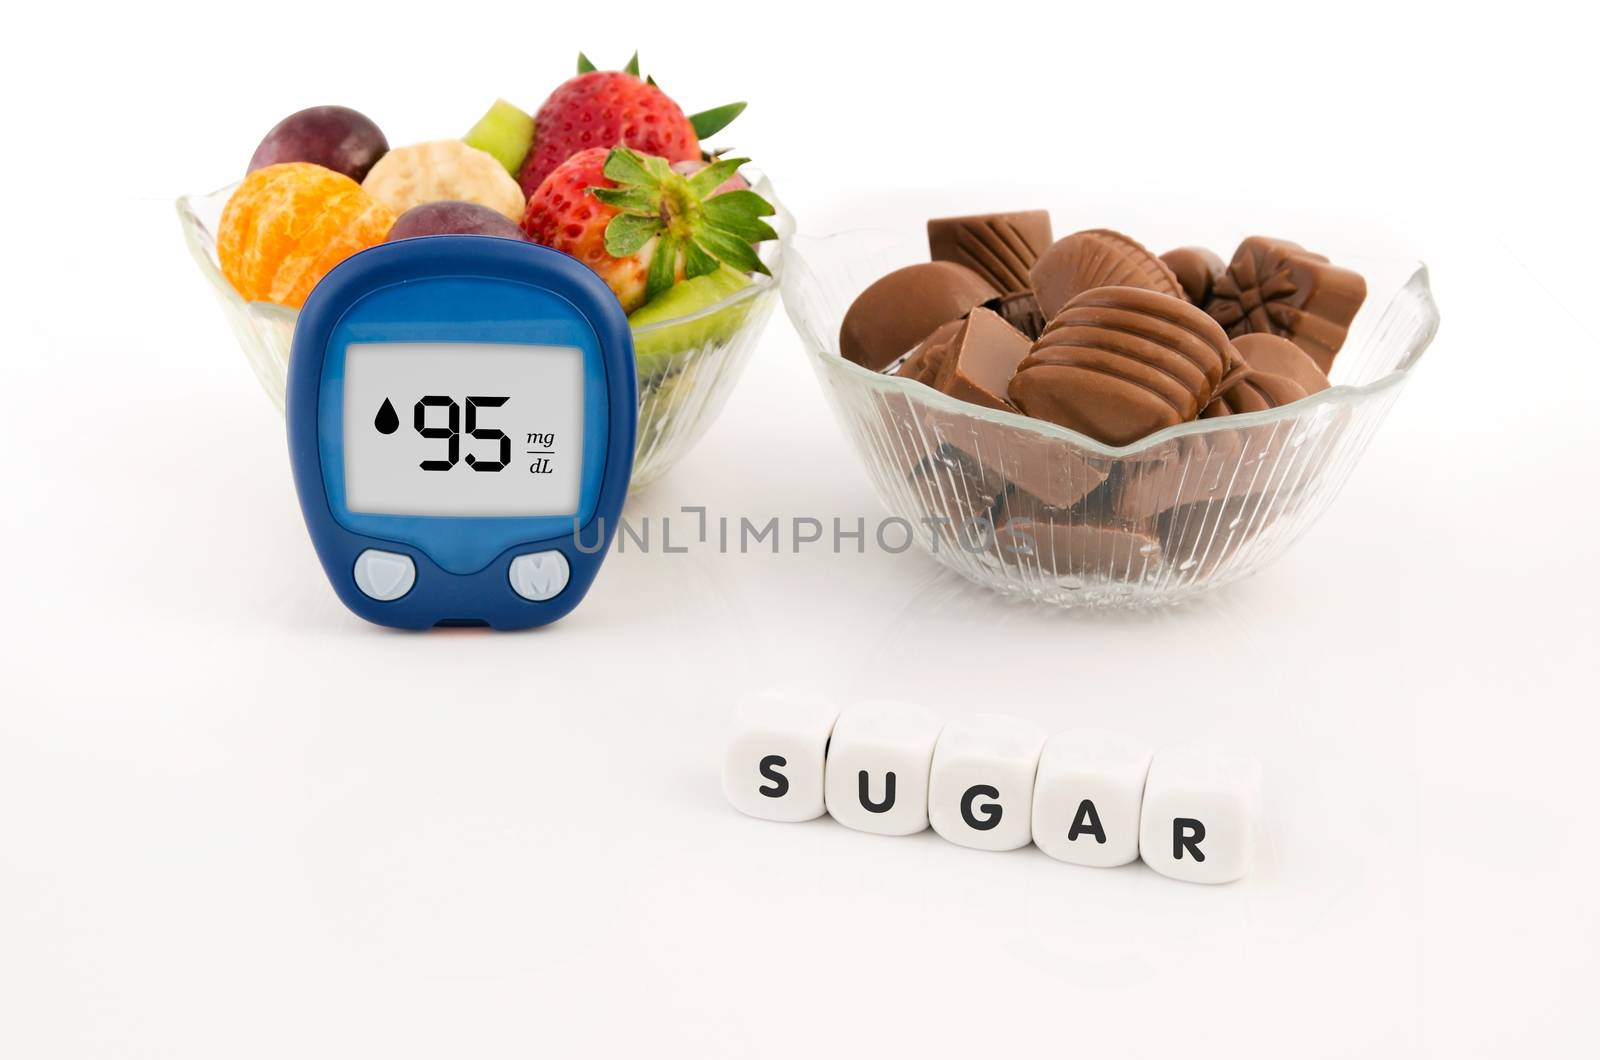 Glucometer and bowl with chocolates and fruits. Healthy lifestyl by simpson33